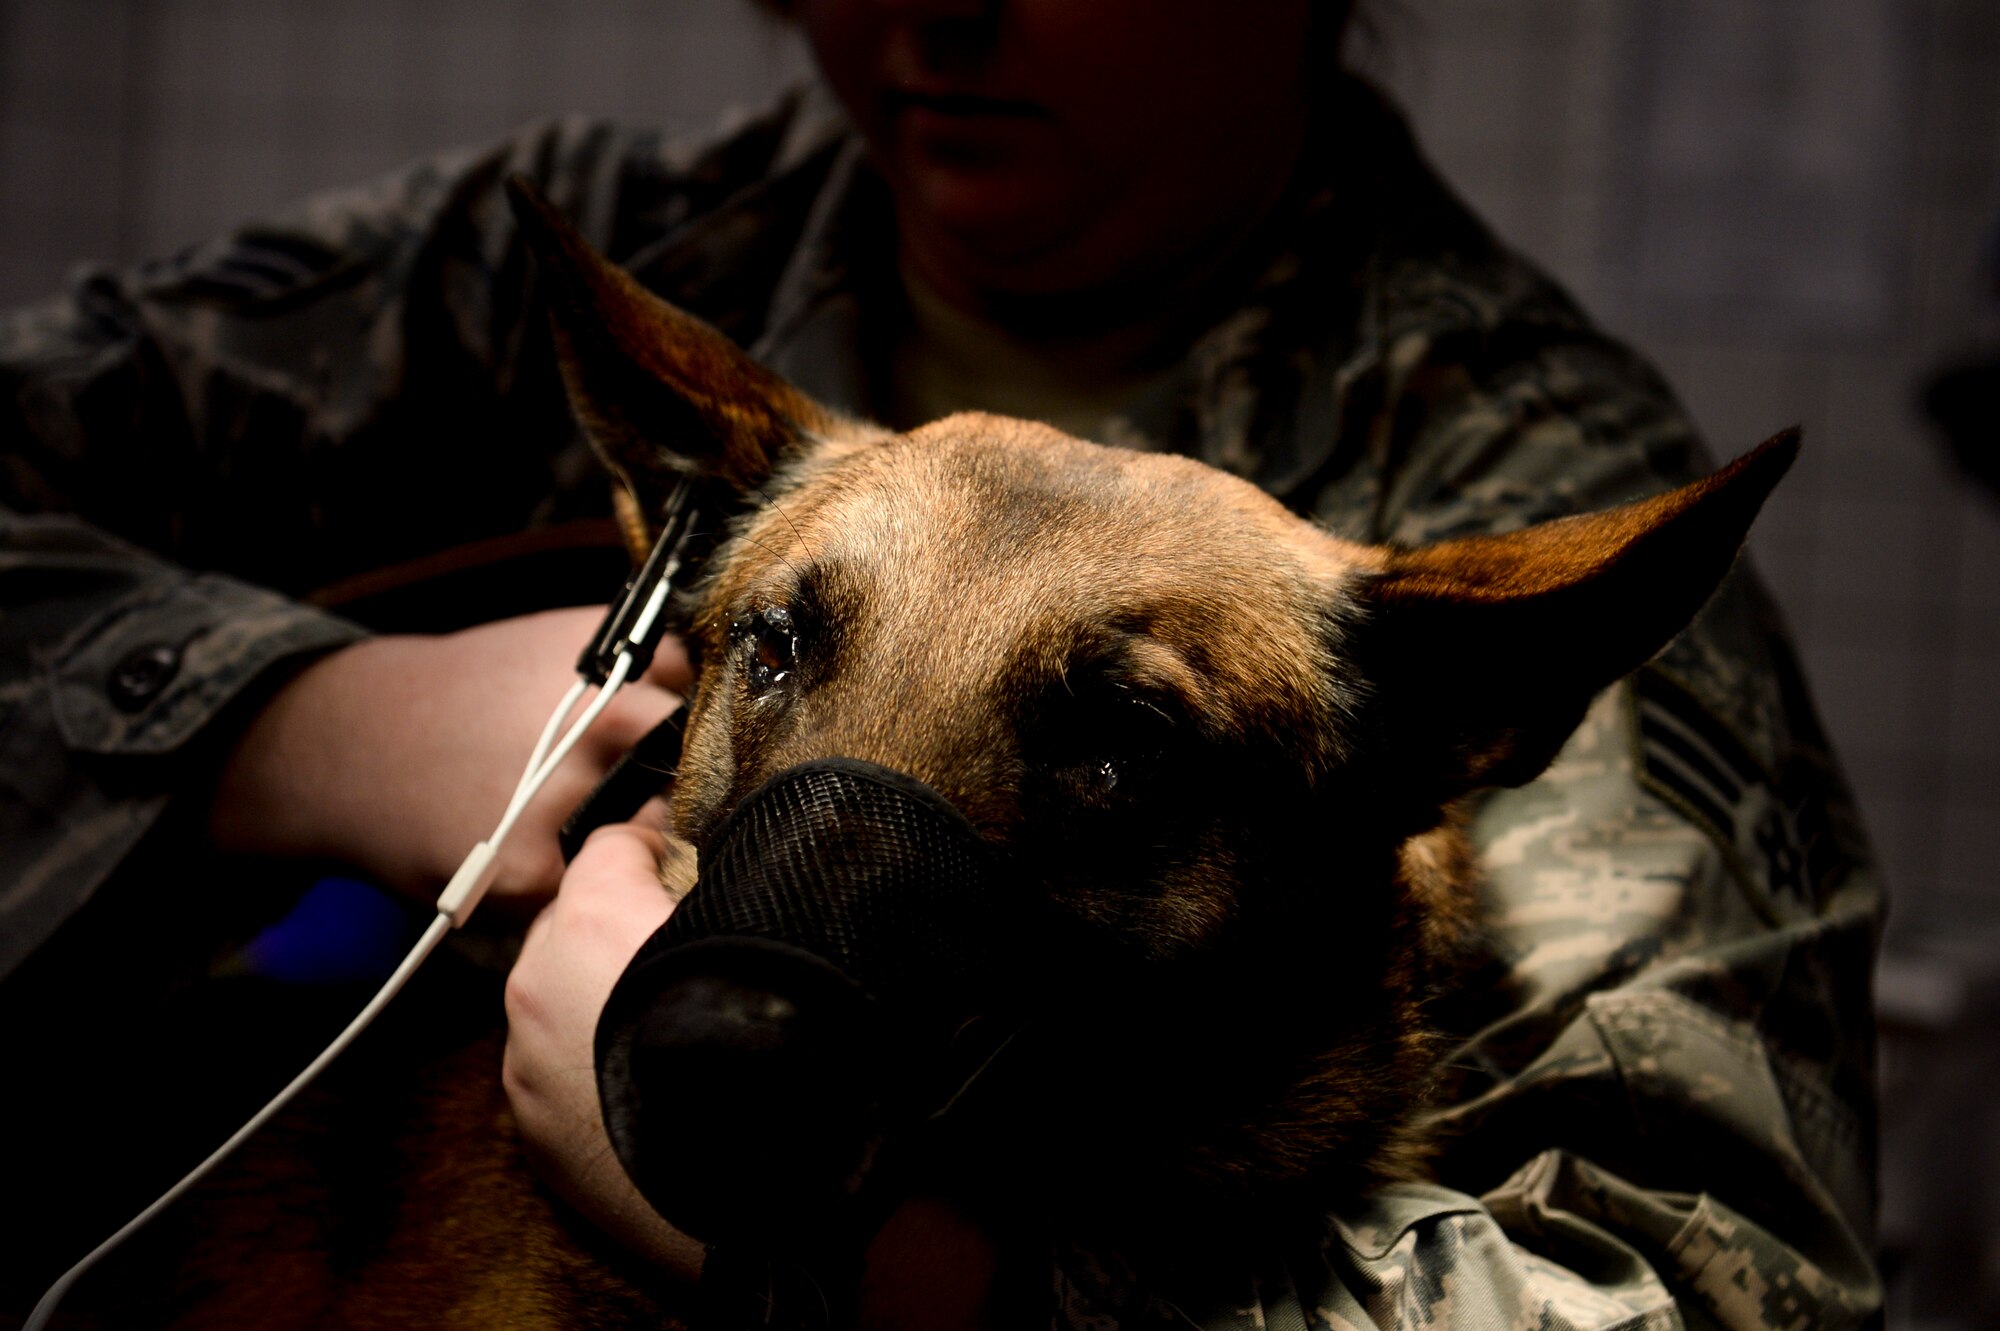 A 52nd Security Forces Squadron military working dog is held by his handler prior to undergoing a oral cleaning at the veterinarian clinic Dec. 4, 2013, at Spangdahlem Air Base, Germany. Military working dogs undergo dental cleaning every year. (U.S. Air Force photo by Senior Airman Rusty Frank/Released)